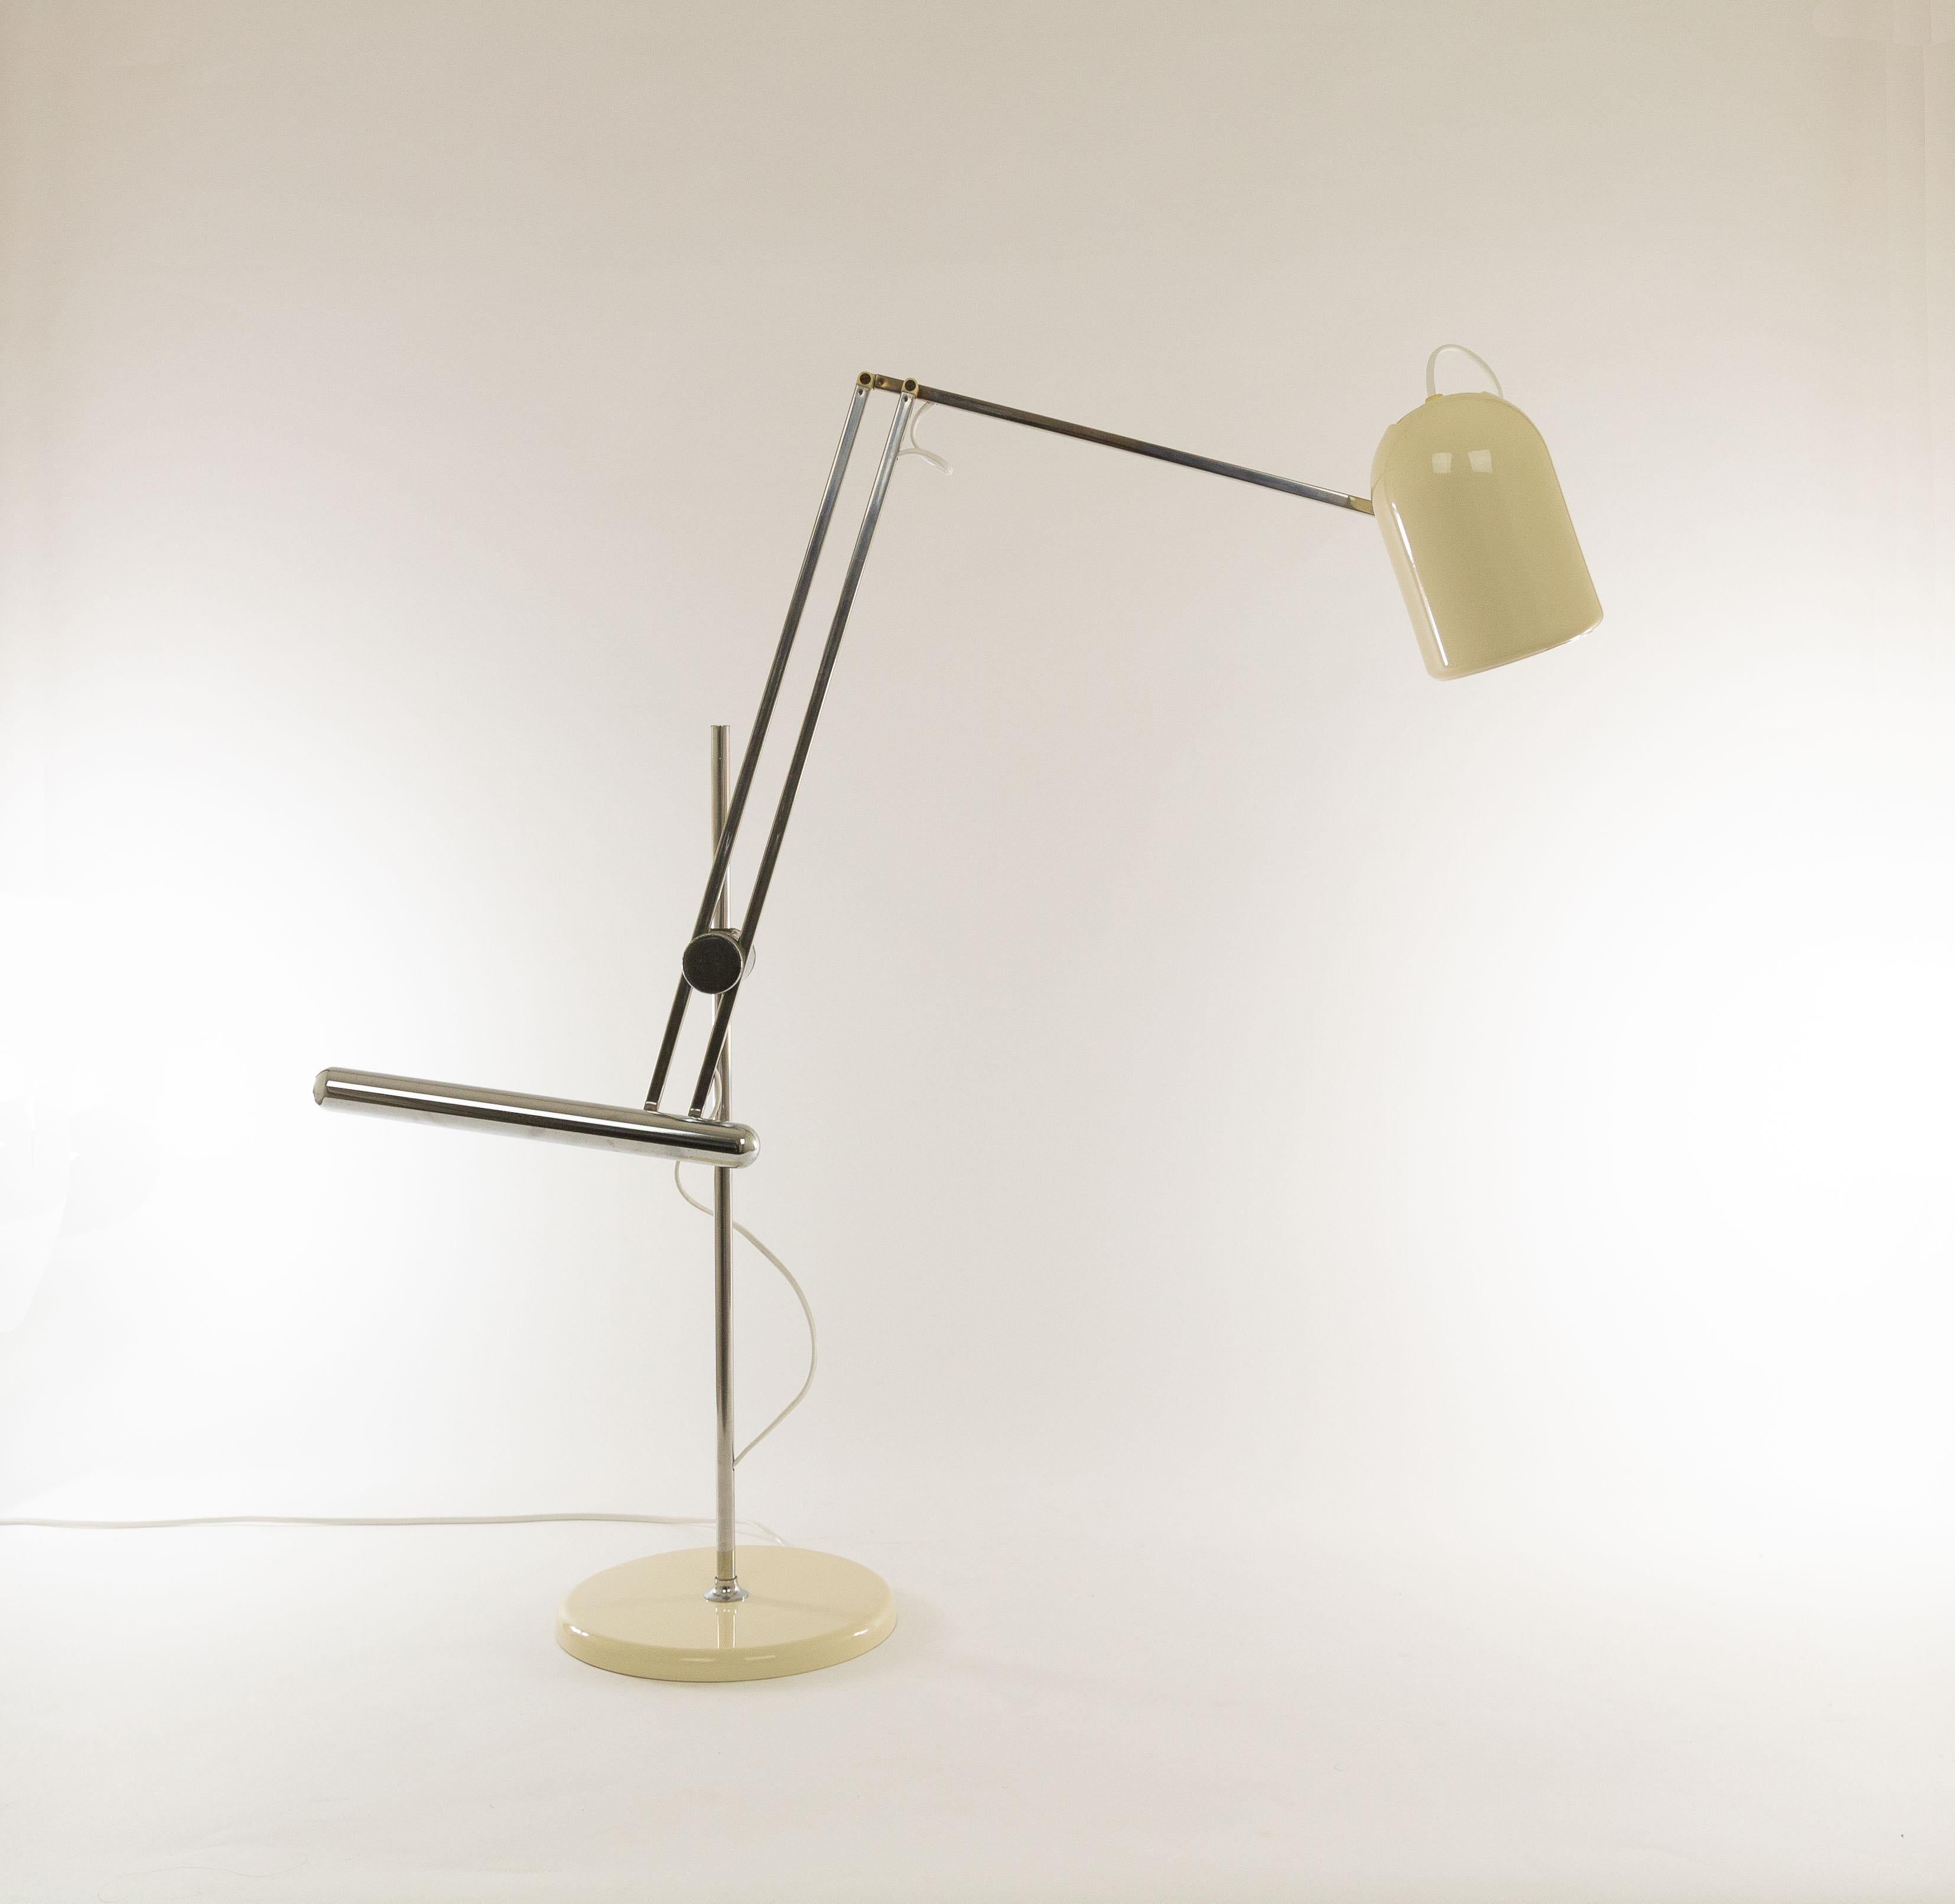 Adjustable table lamp model G32 designed and manufactured by Reggiani Illuminazione in the early 1970s.

This design consists of a chromed metal stem, frame and counterweight, with a lacquered shade and base. The lamp can be adjusted up and down